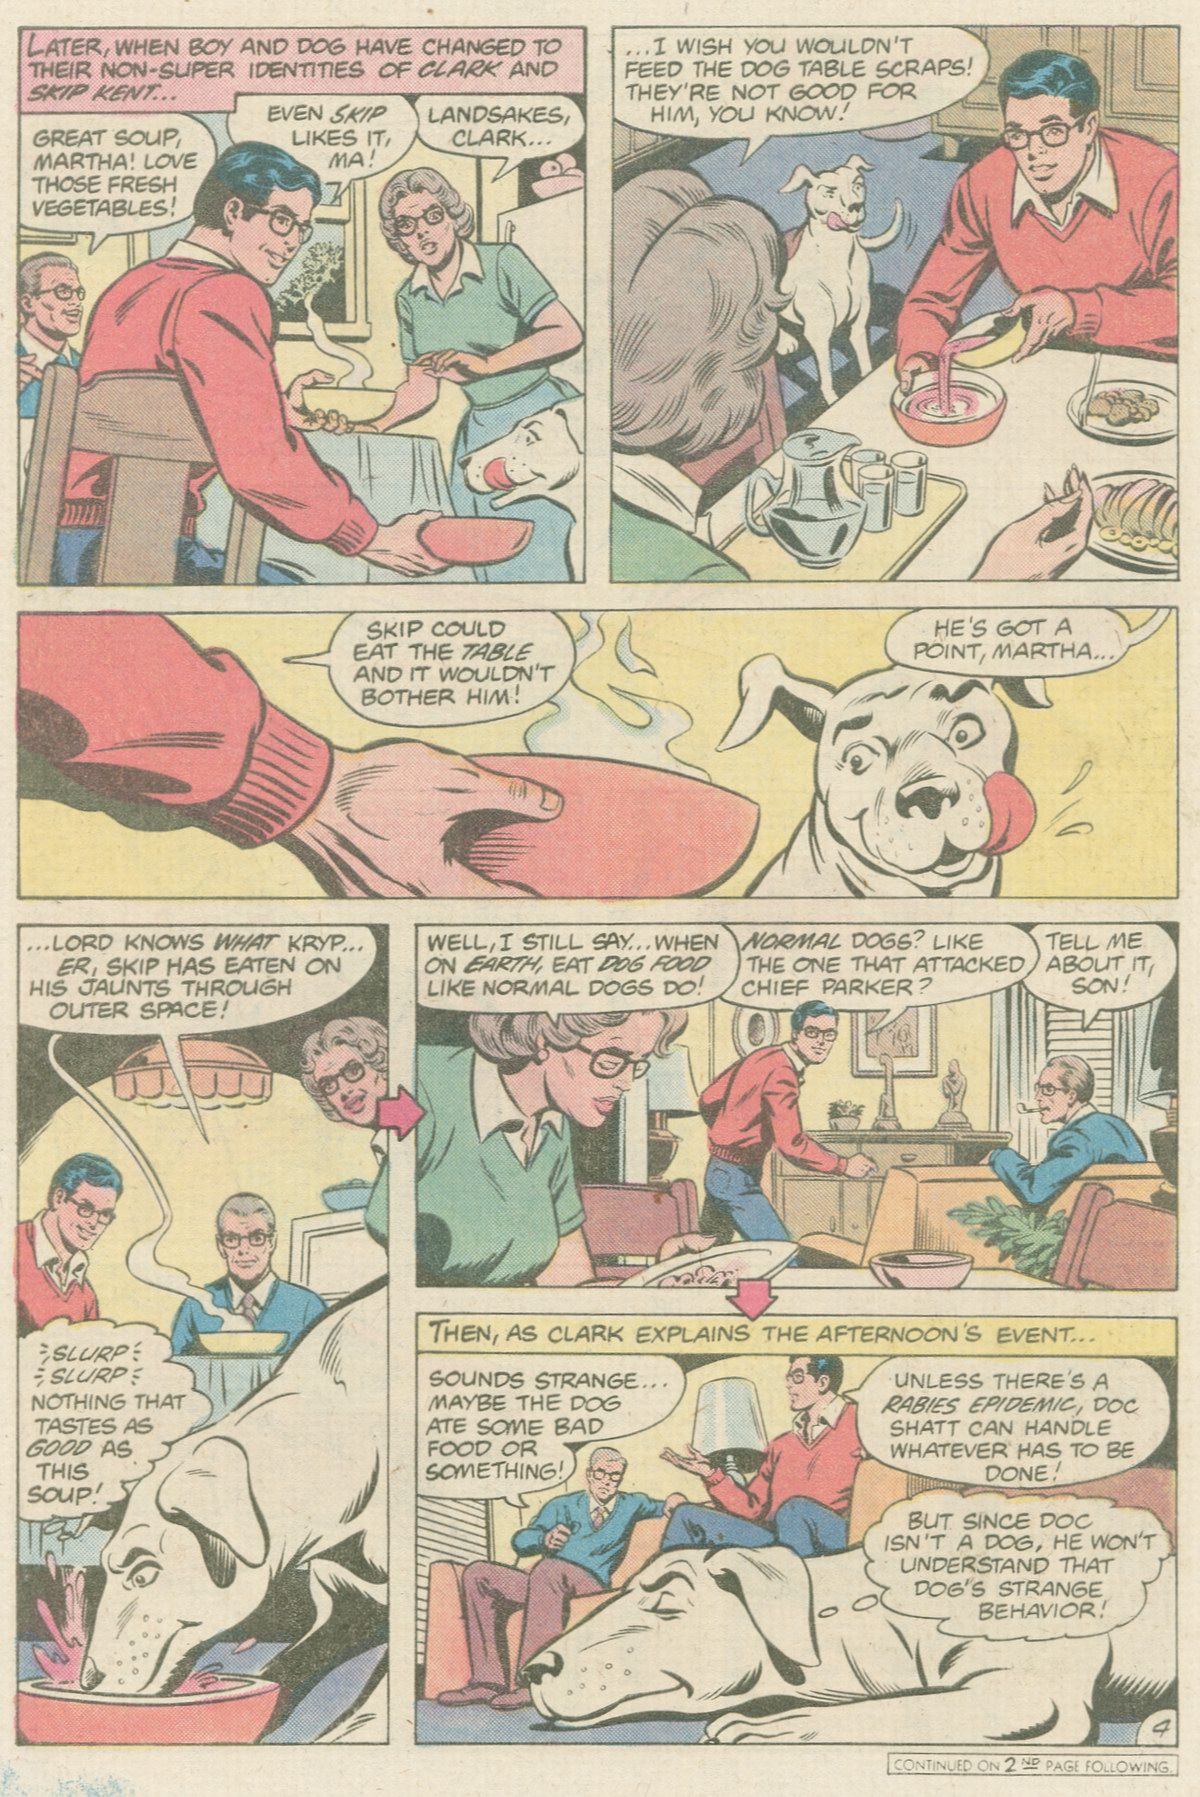 The New Adventures of Superboy 22 Page 24